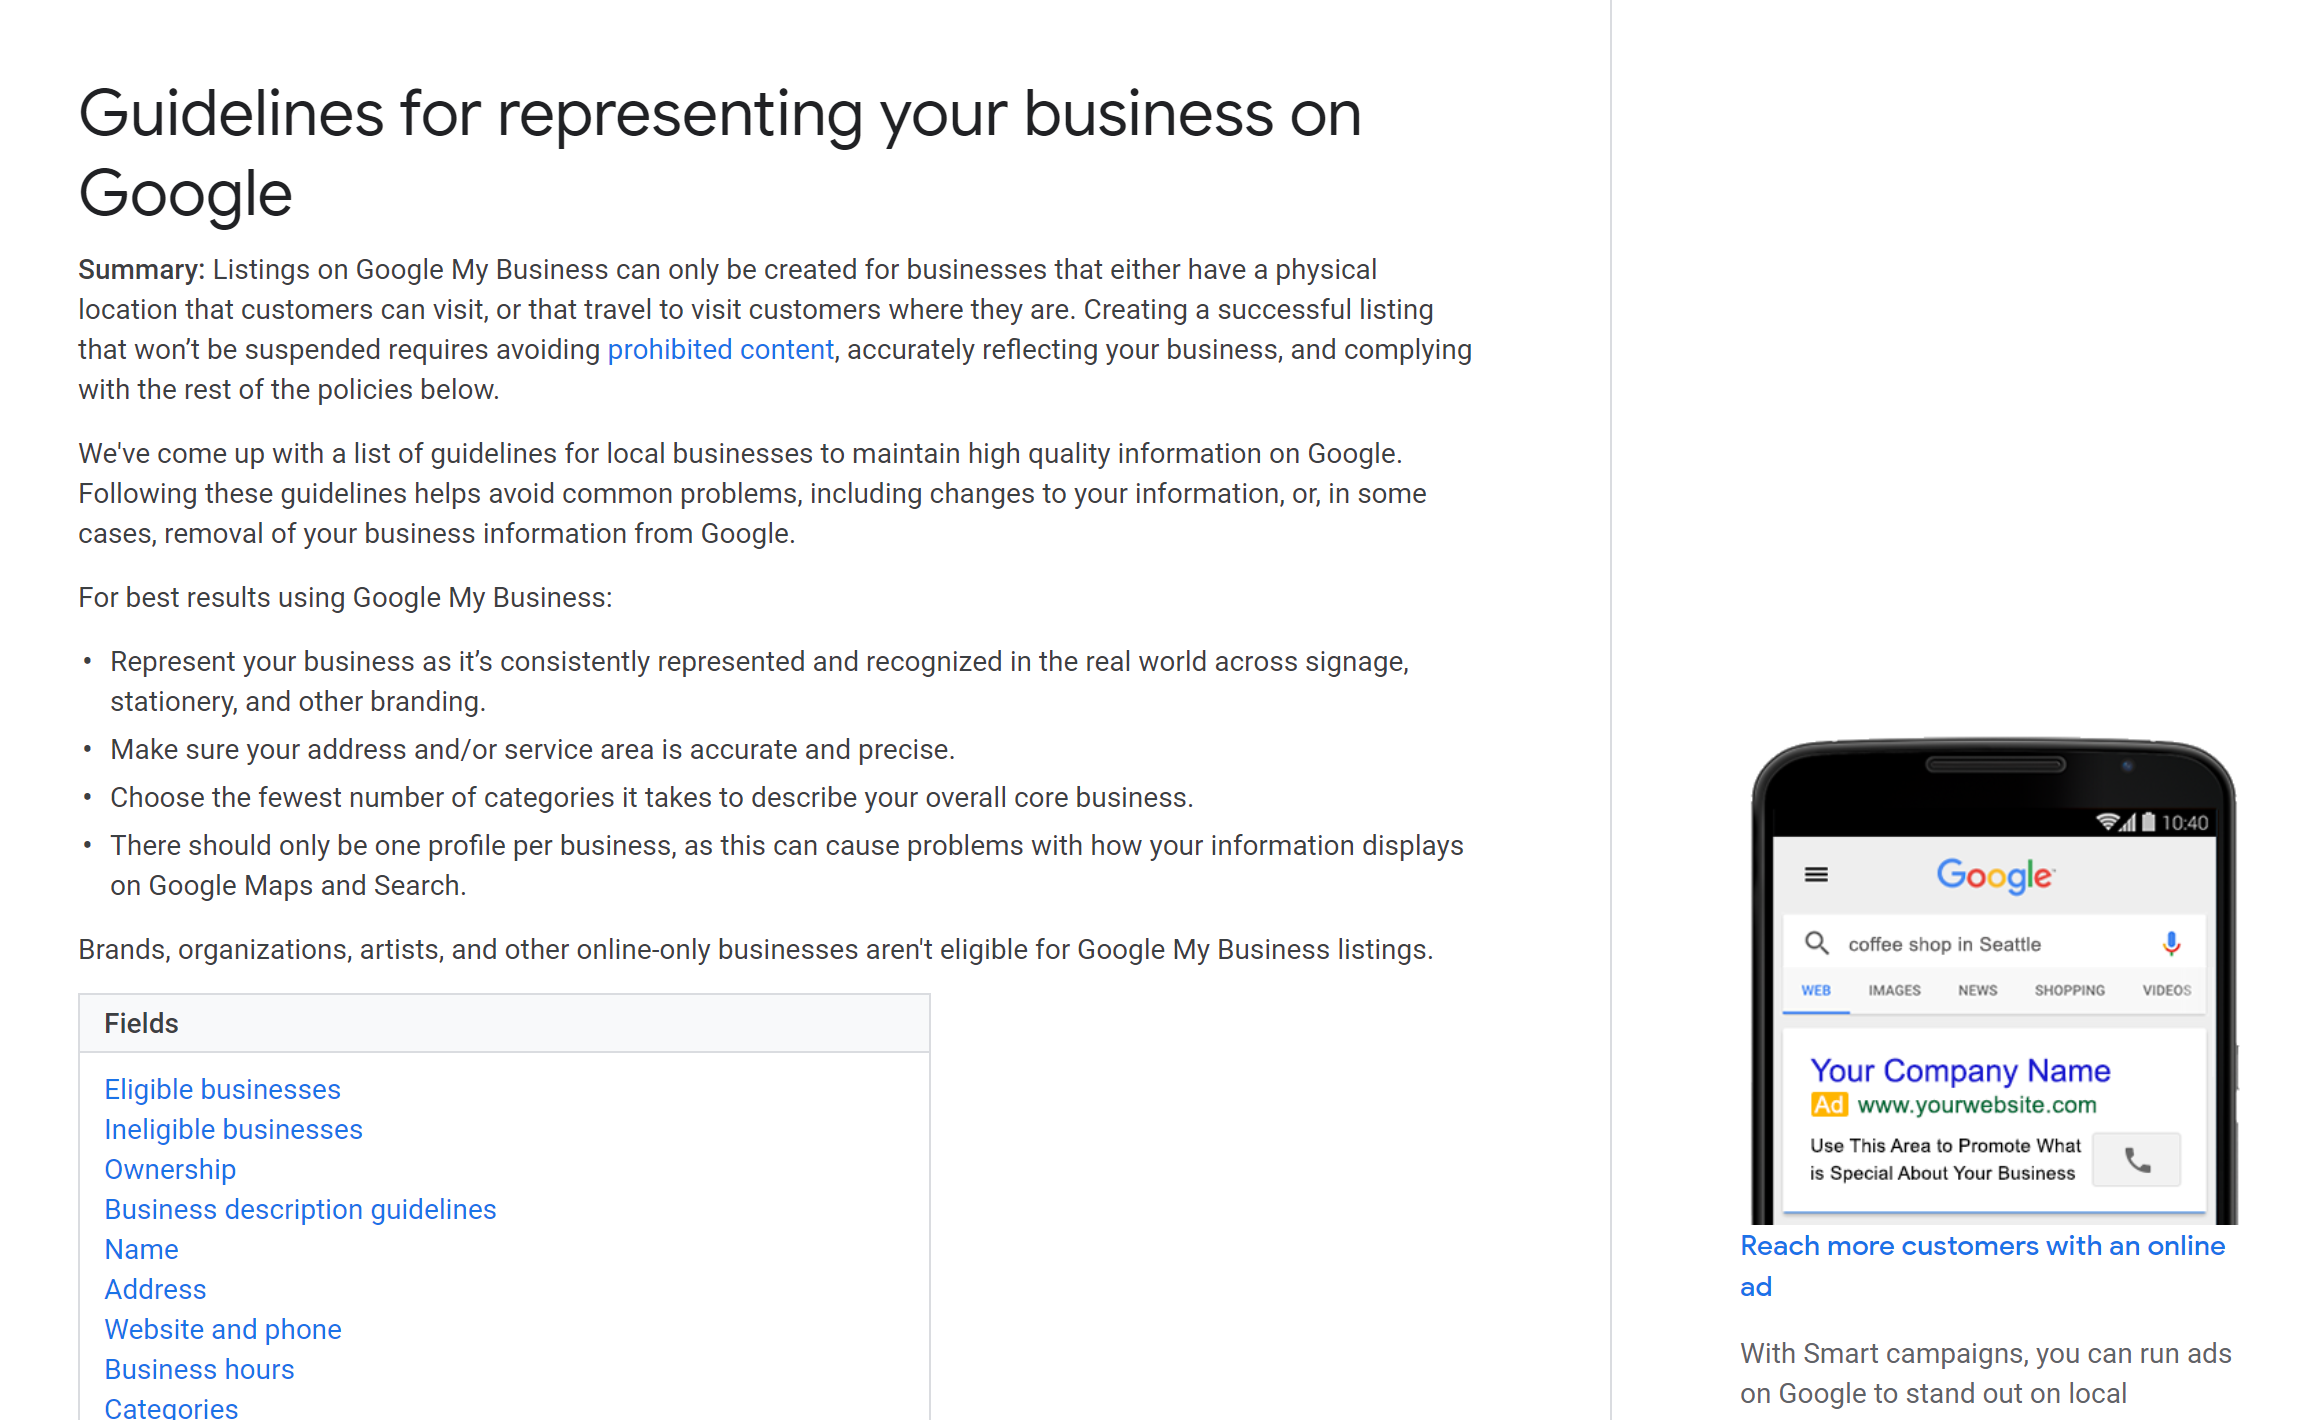 Guidelines for representing your business on Google.